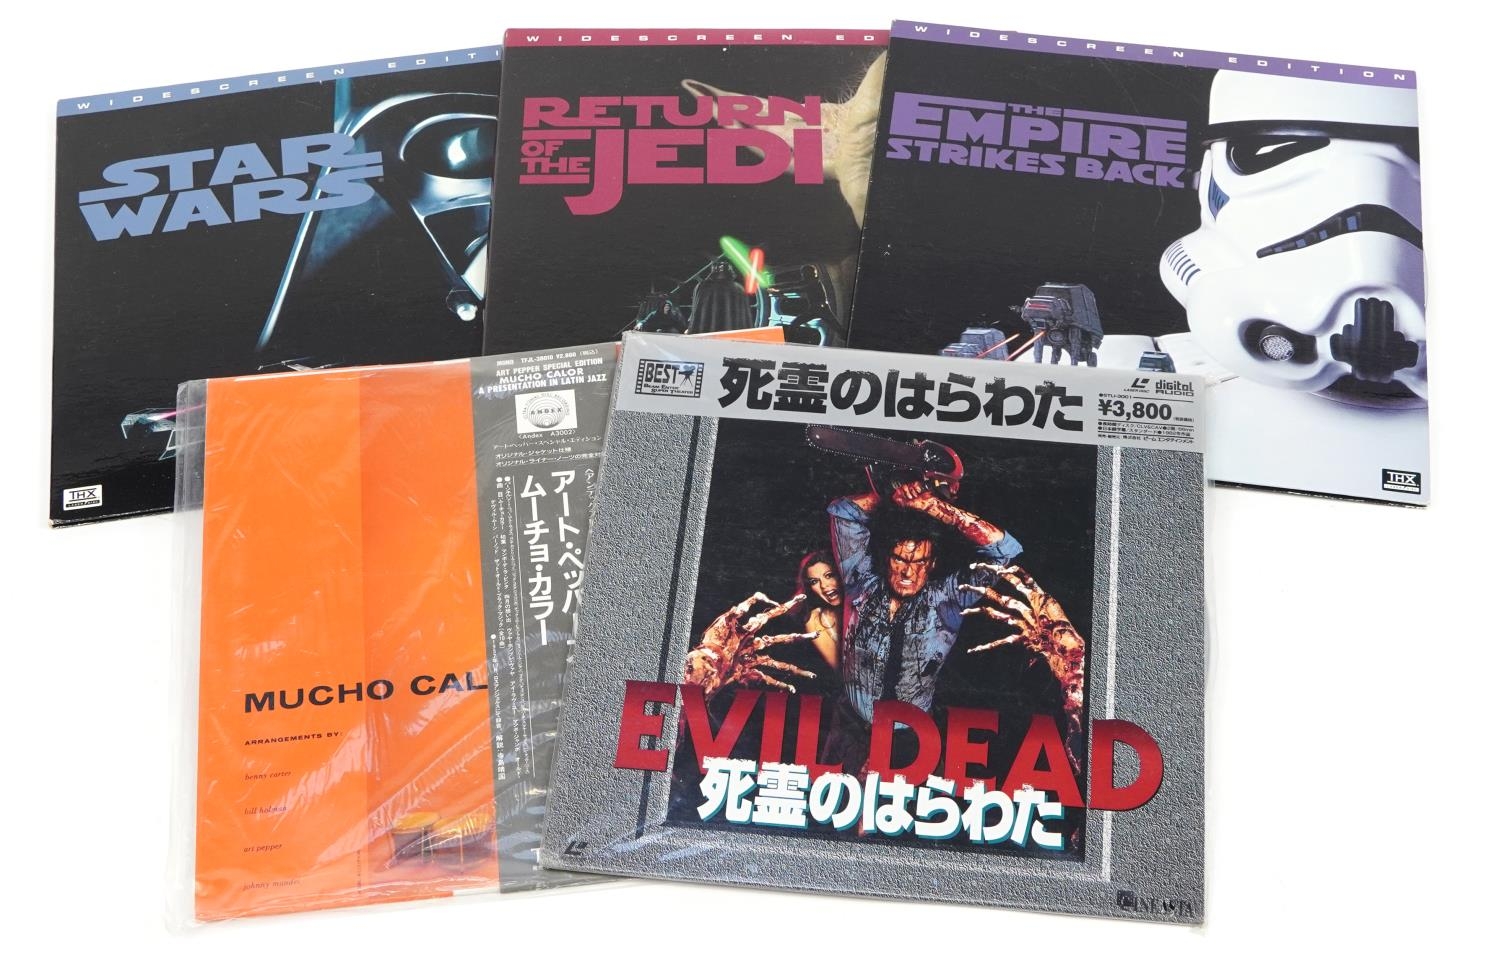 Three Star Wars laser discs and two Japanese examples comprising Evil Dead and Mucho Calor For